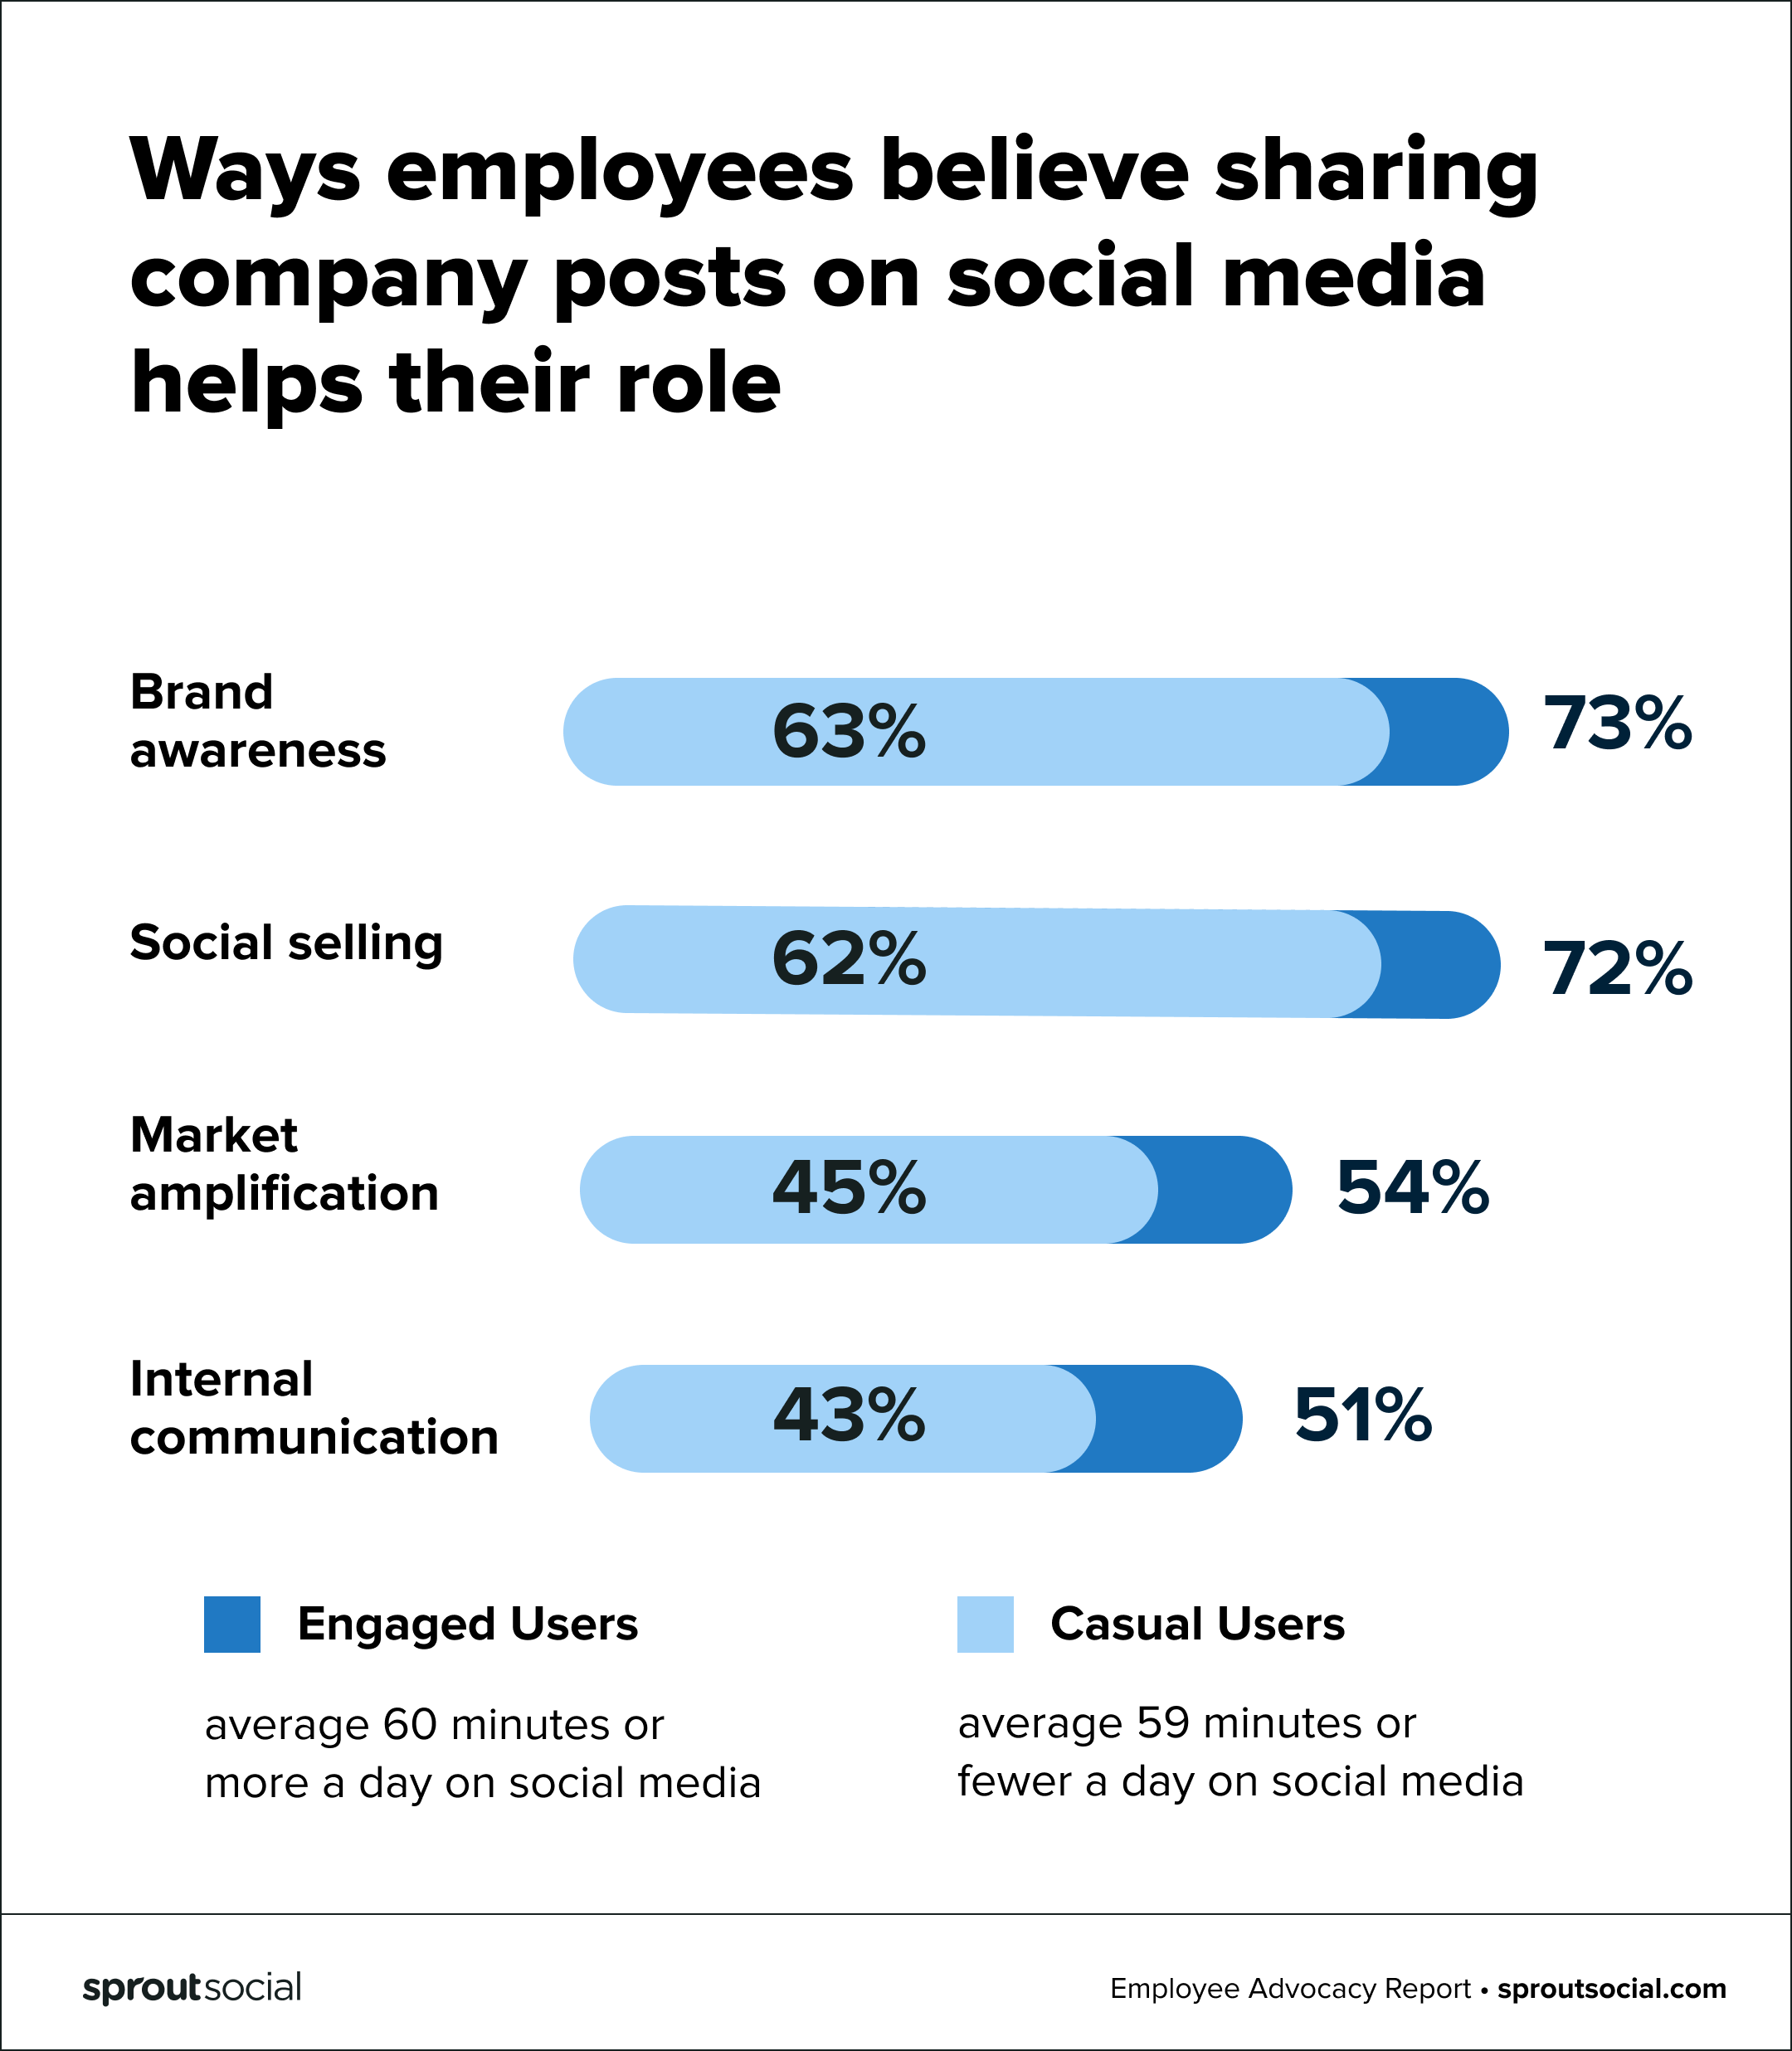 A graphic that reads: Ways employees believe sharing company posts on social media helps their role. The ways include: brand awareness, social selling, market amplification and internal communication. The chart compares engaged user responses (employees who spend average of 60 minutes or more on social media each day) and casual user responses (employees who spend less than 60 minutes a day on social media). Brand awareness and social selling are top reasons for engaged and casual users.